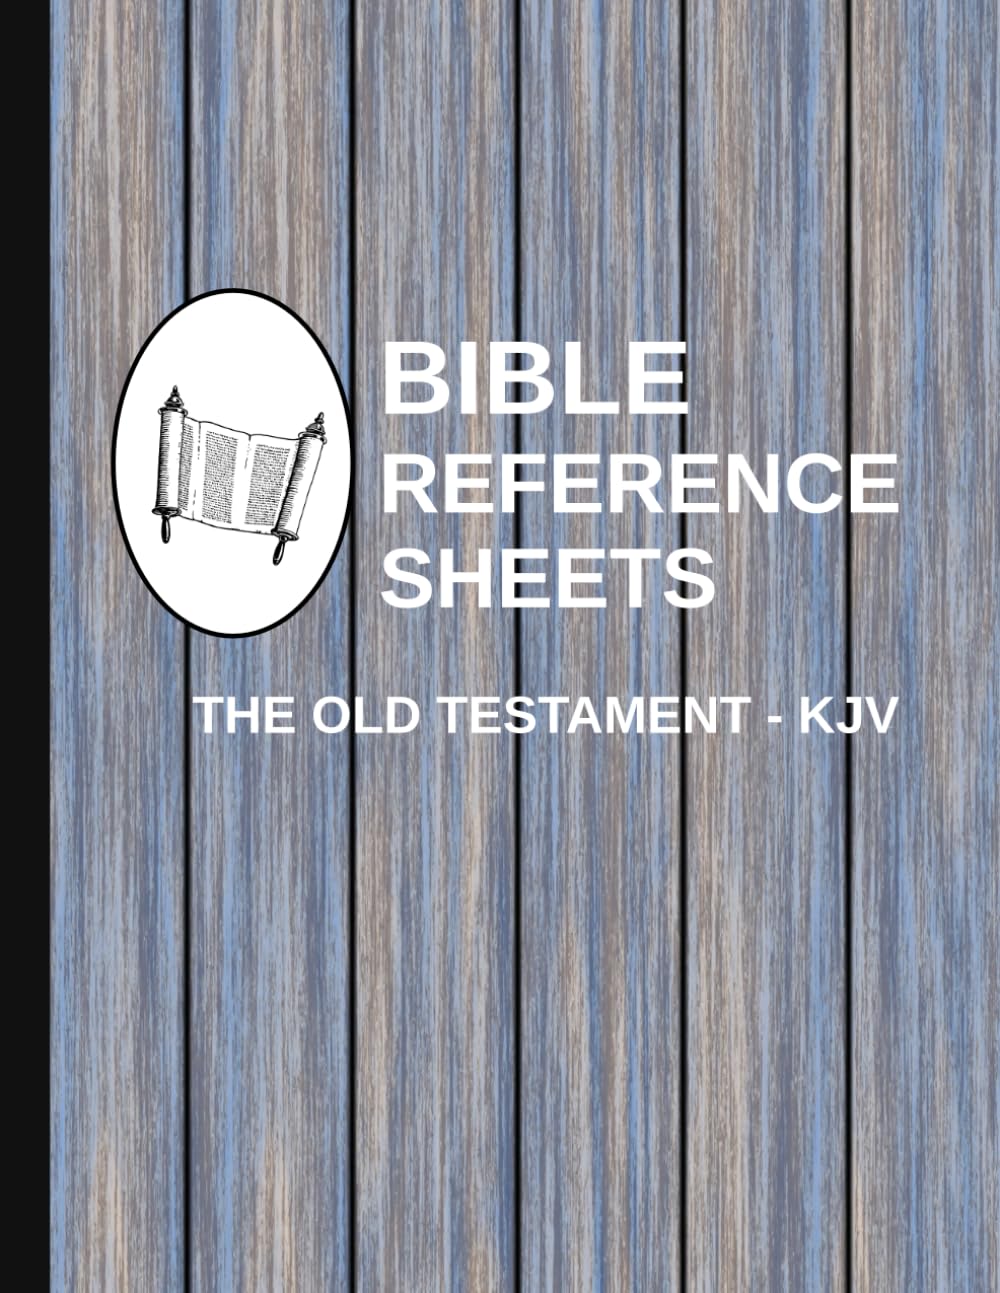 Bible Reference Sheets - The Old Testament, KJV: A Book-by-Book Summary of Key People, Places, Words, Verses and more